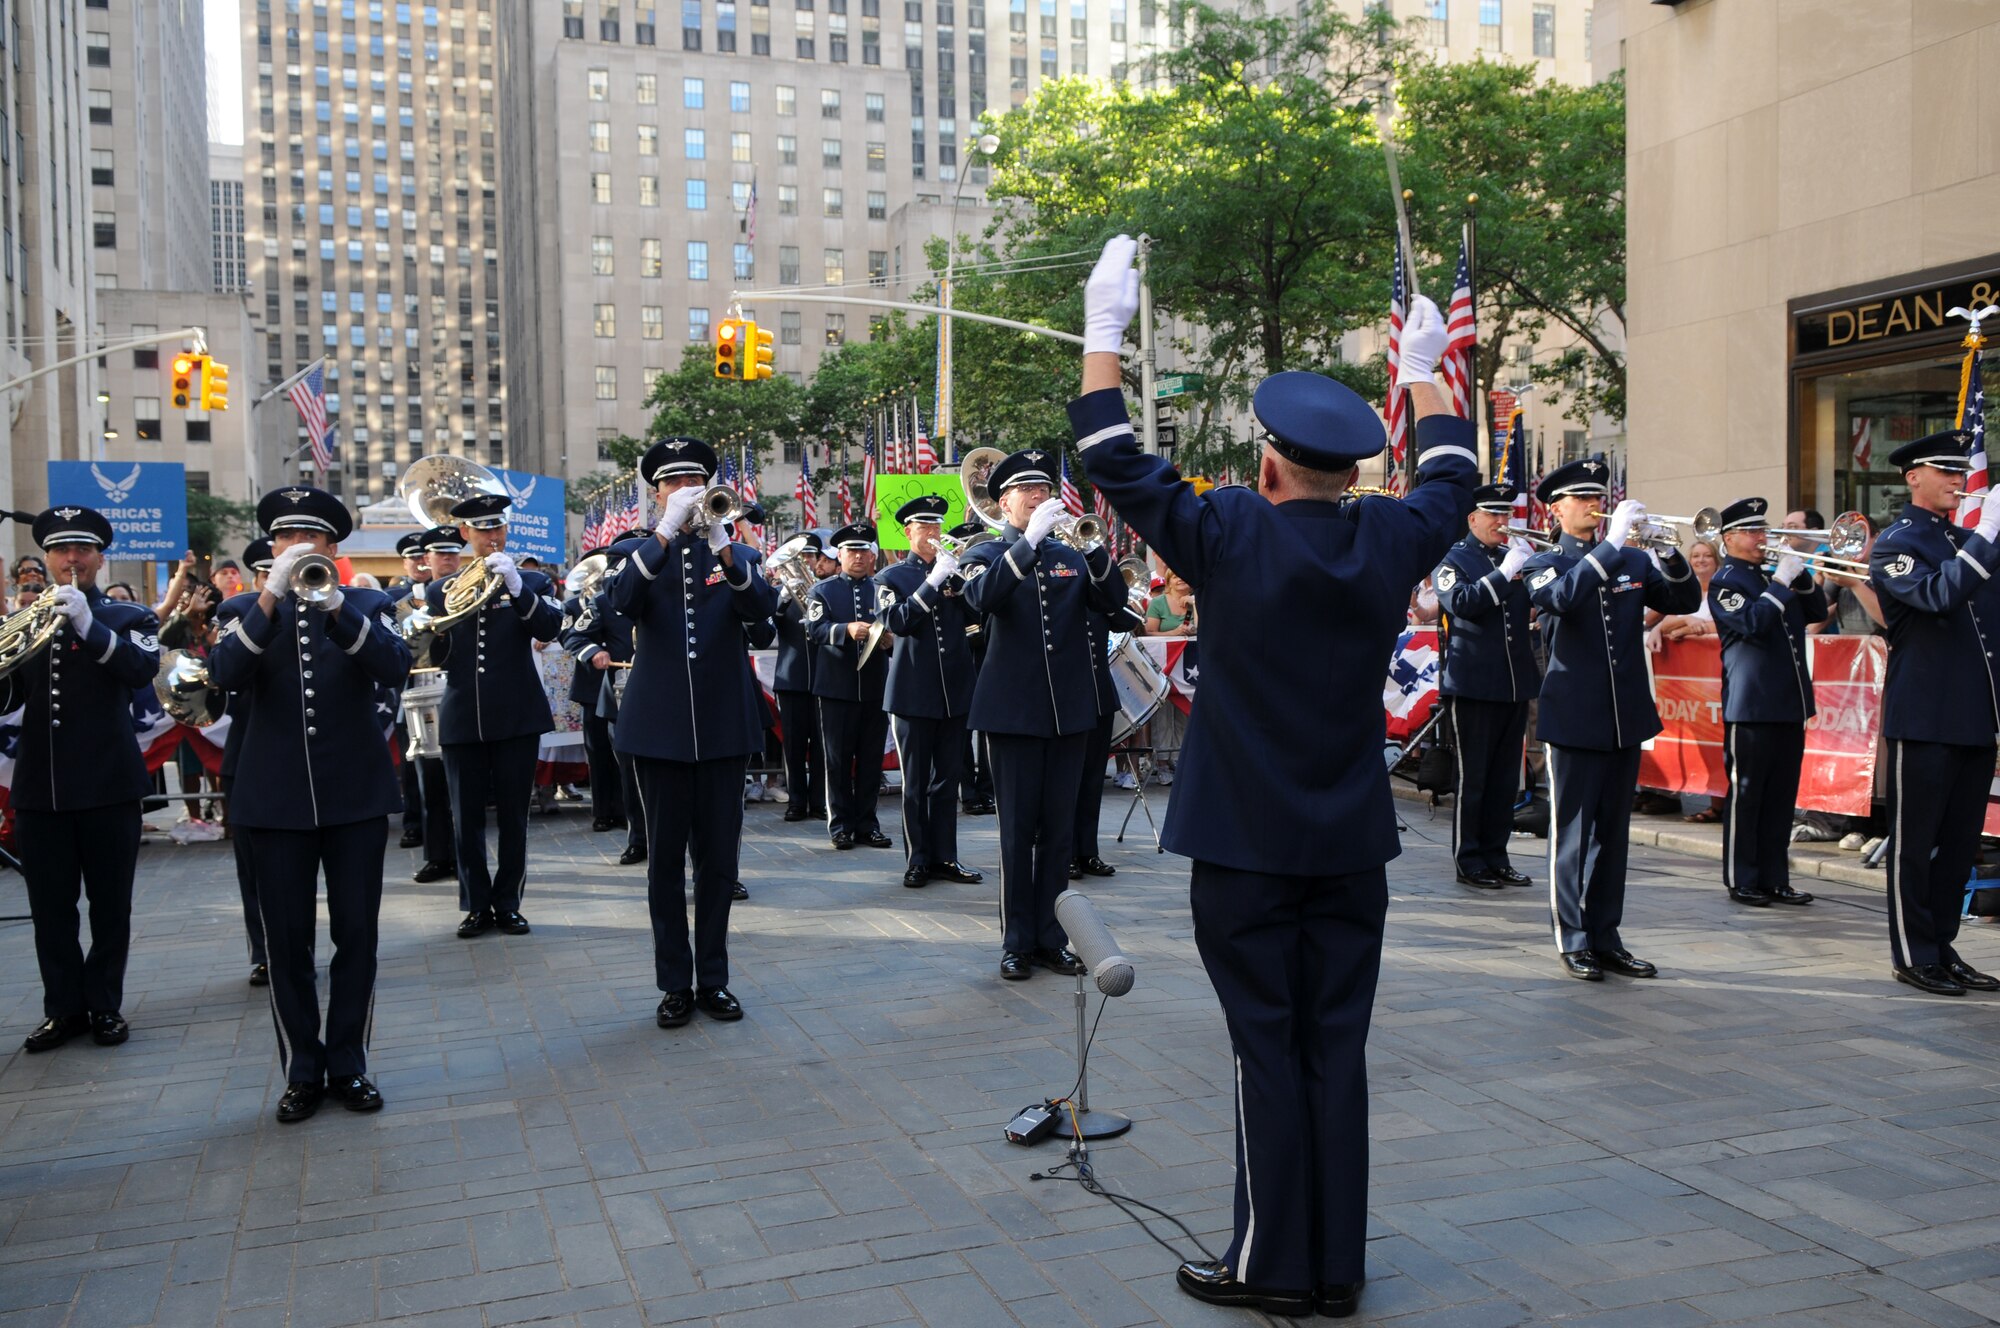 The U.S. Air Force Band’s Ceremonial Brass group performs during a live broadcast on the Today Show before and after commercial breaks July 4 from Rockefeller Plaza in New York City. The Ceremonial Brass has performed annually on the Today show since 1998. (U.S. Air Force photo by Senior Airman Marleah Miller)